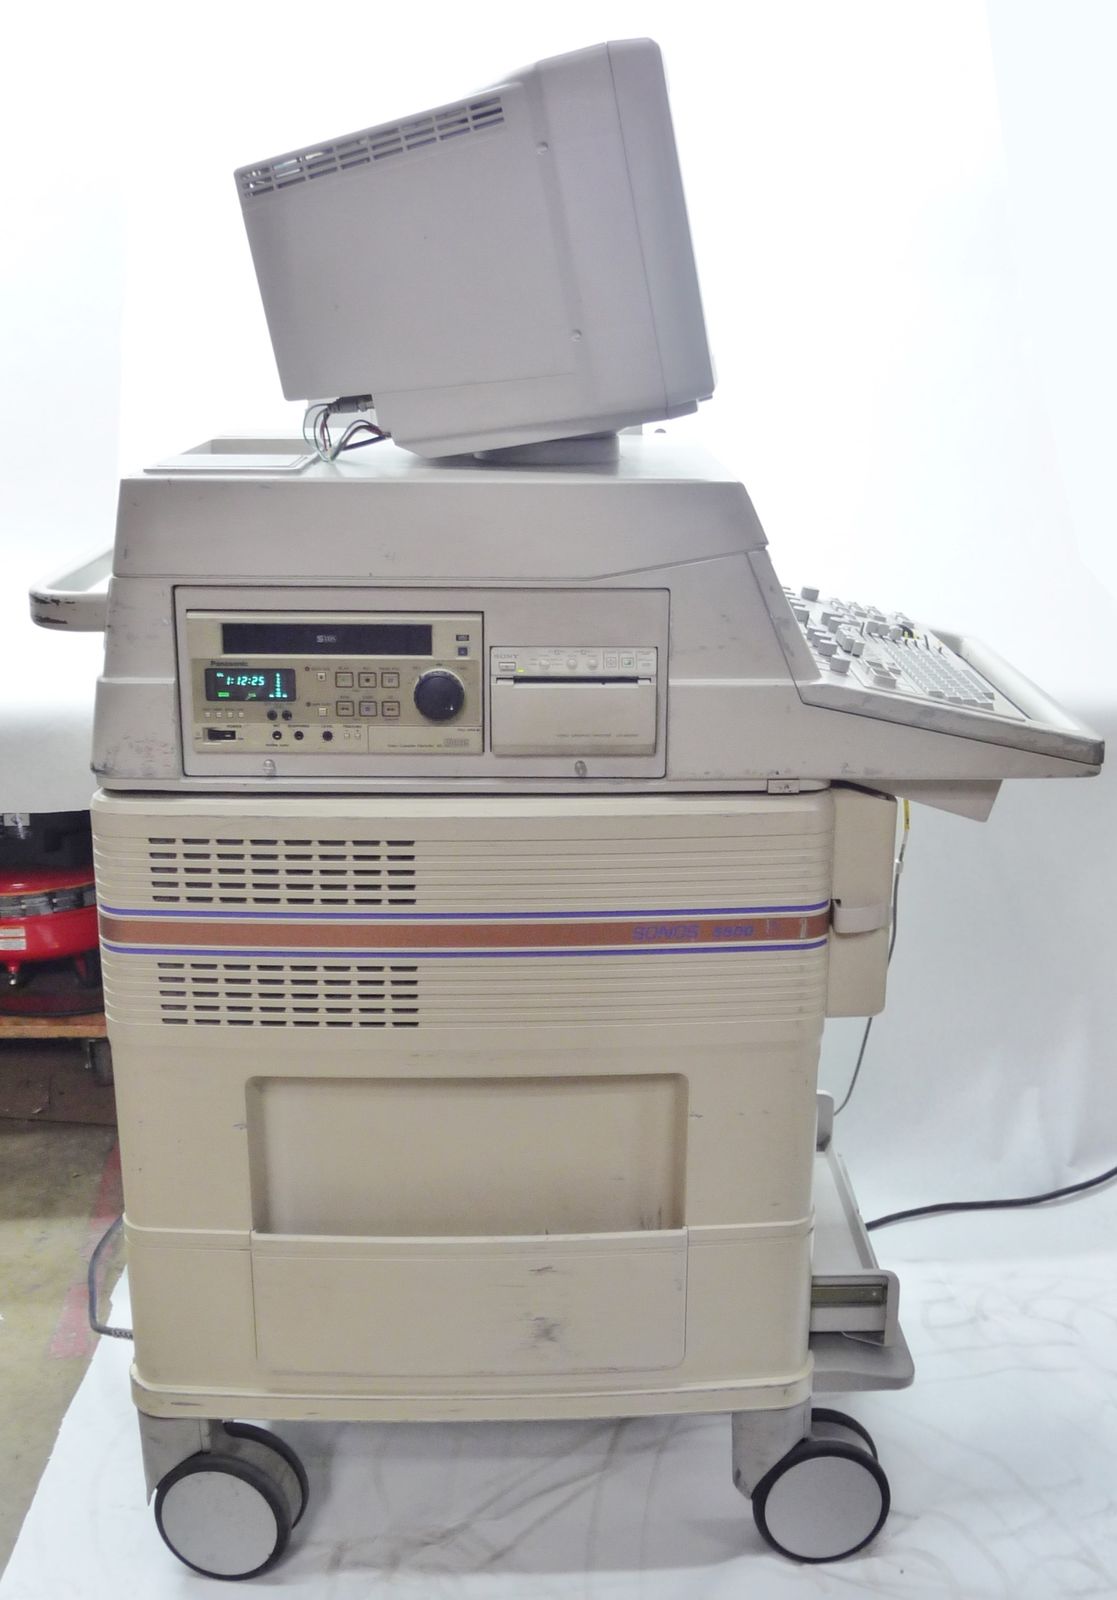 an old computer sitting on top of a cart